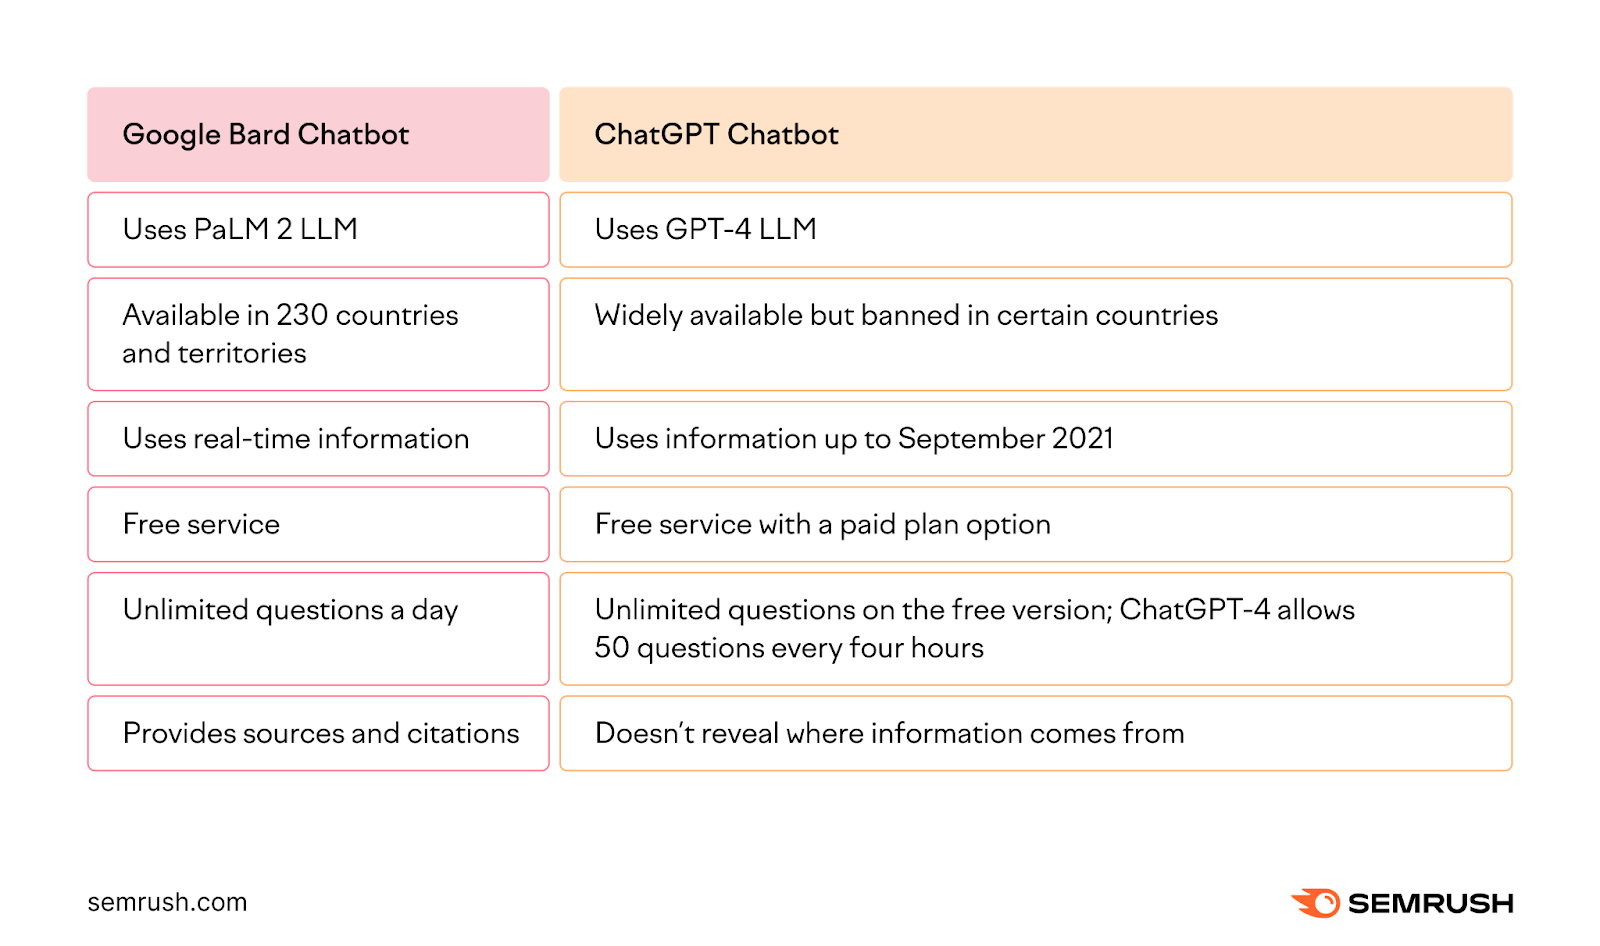 An infographic listing the key differences between Google Bard Chatbot and ChatGPT Chatbot